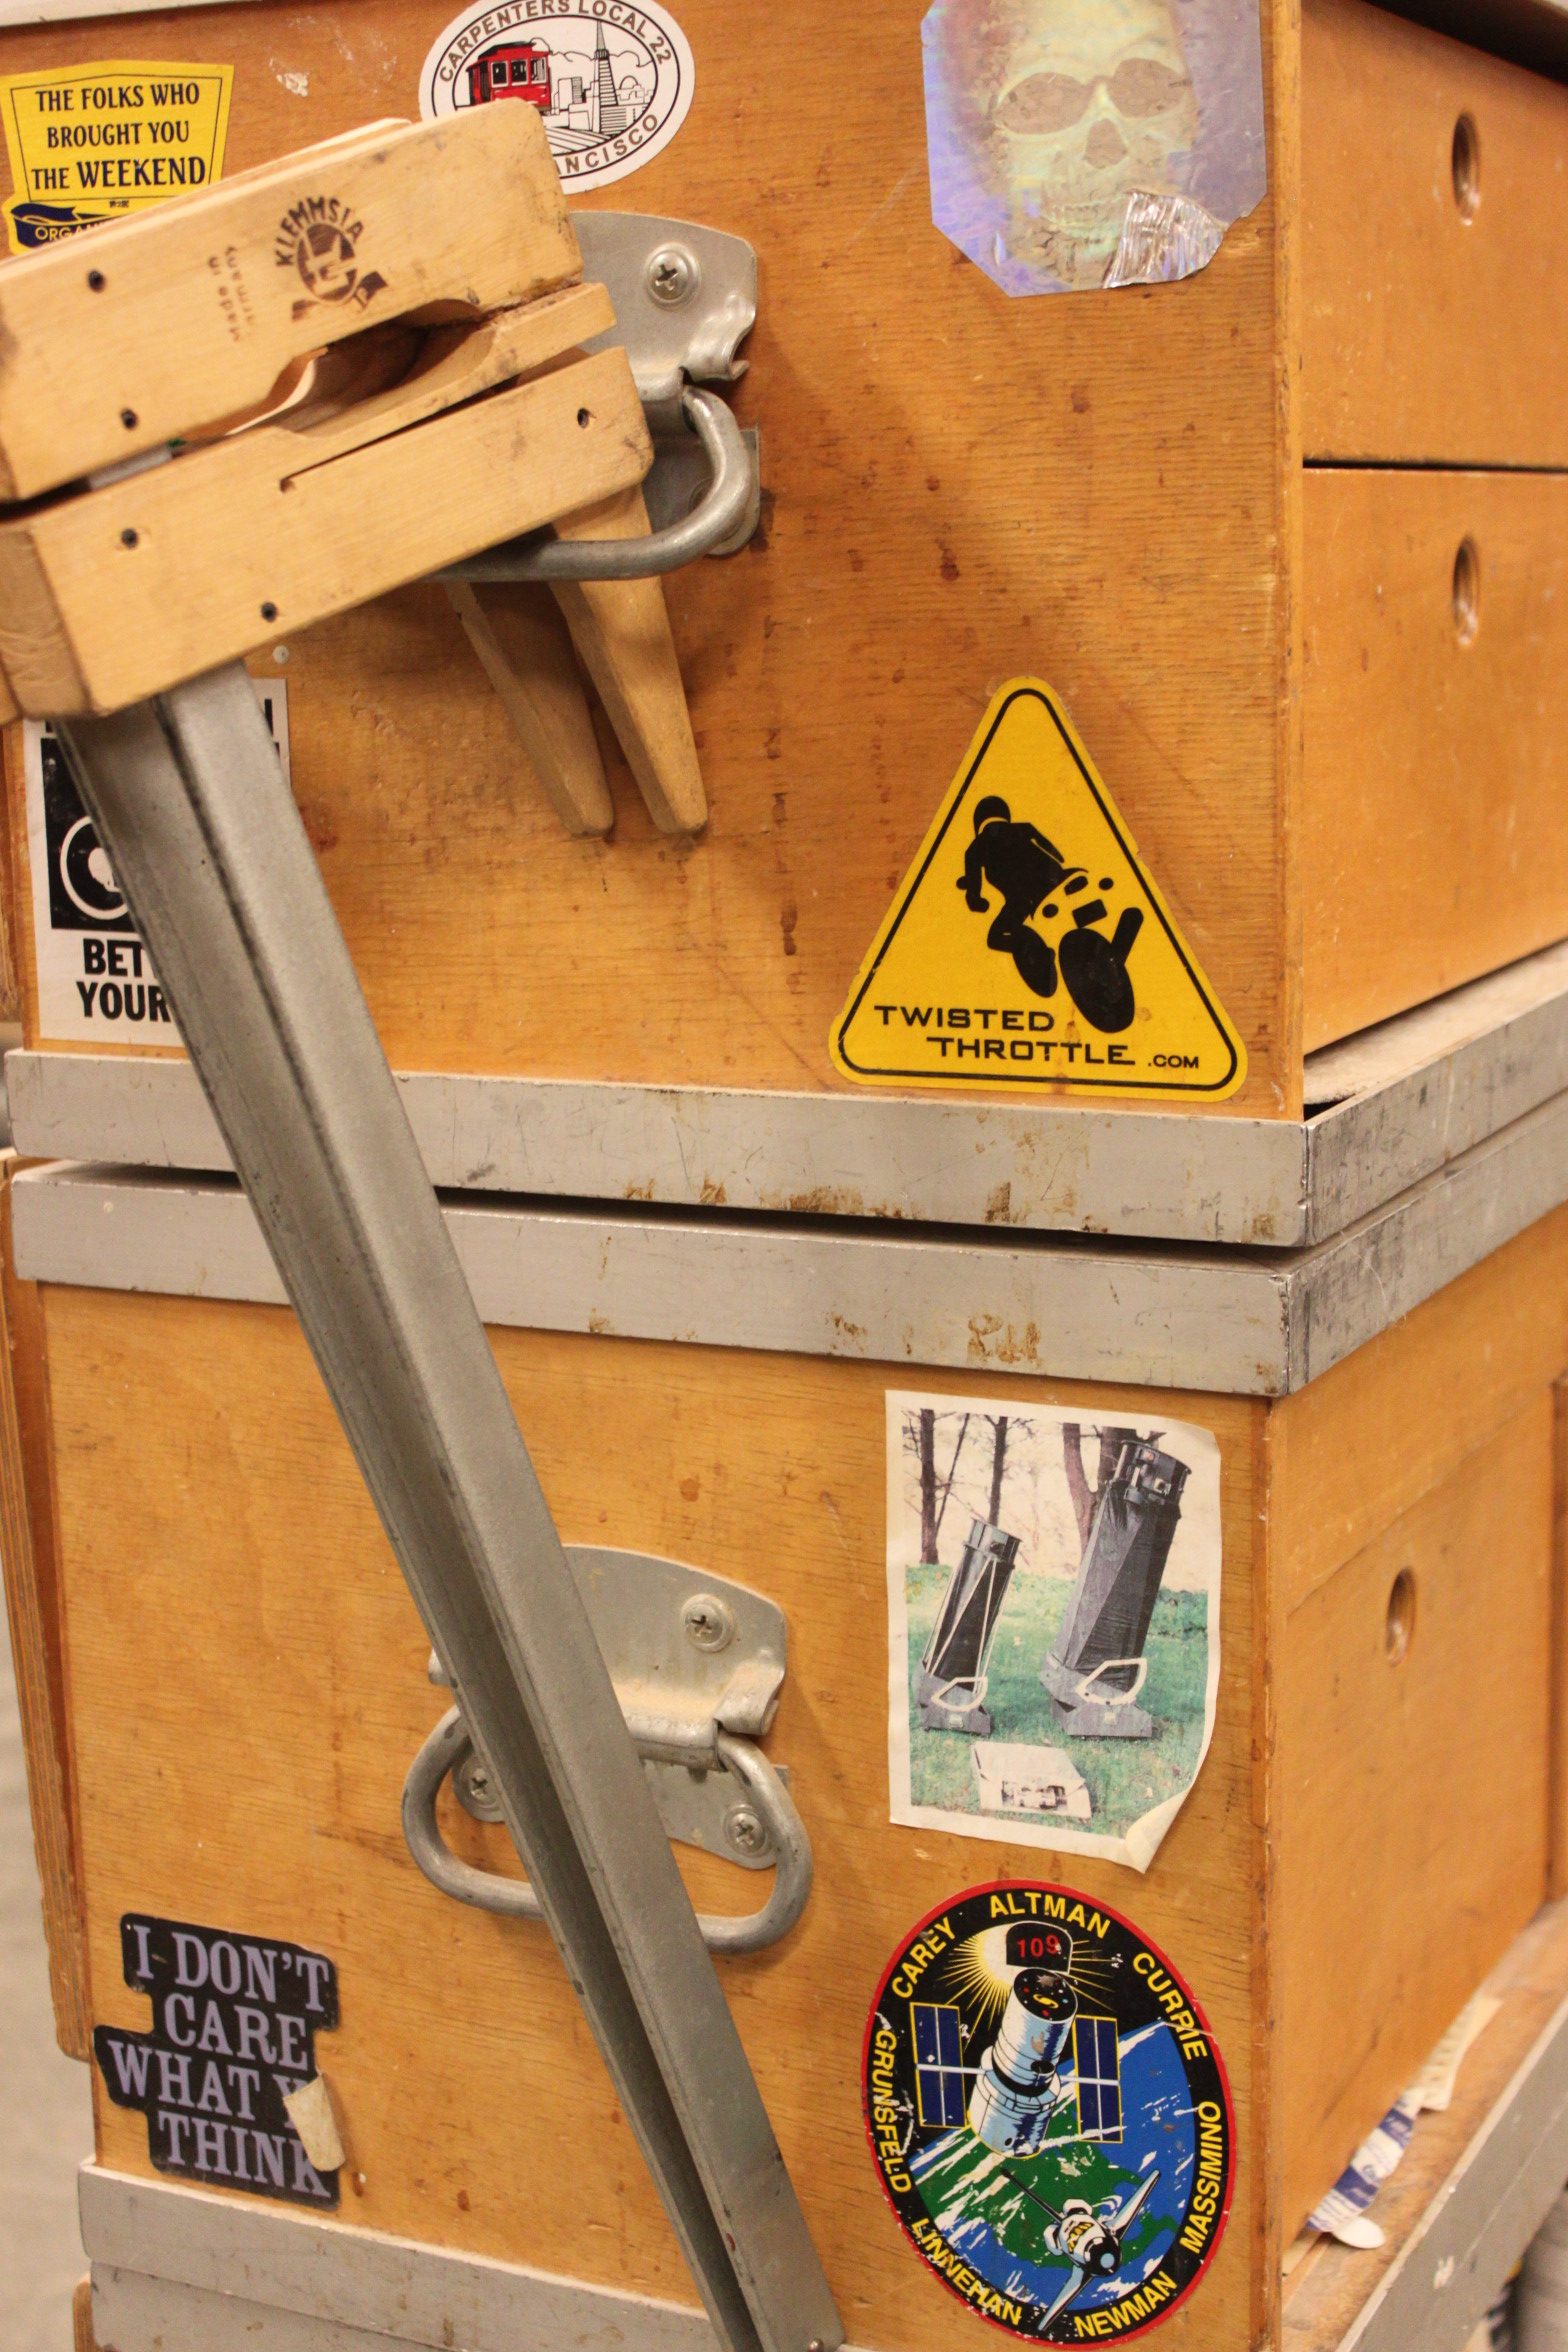 Prof. Raymond Cash is not only a carpenter but avid astronomer. Near a dangling saw and plastered in the middle right of Cash’s tool box is a sticker boasting two telescopes that he has built himself.  Photo taken on Nov. 13, 2017.